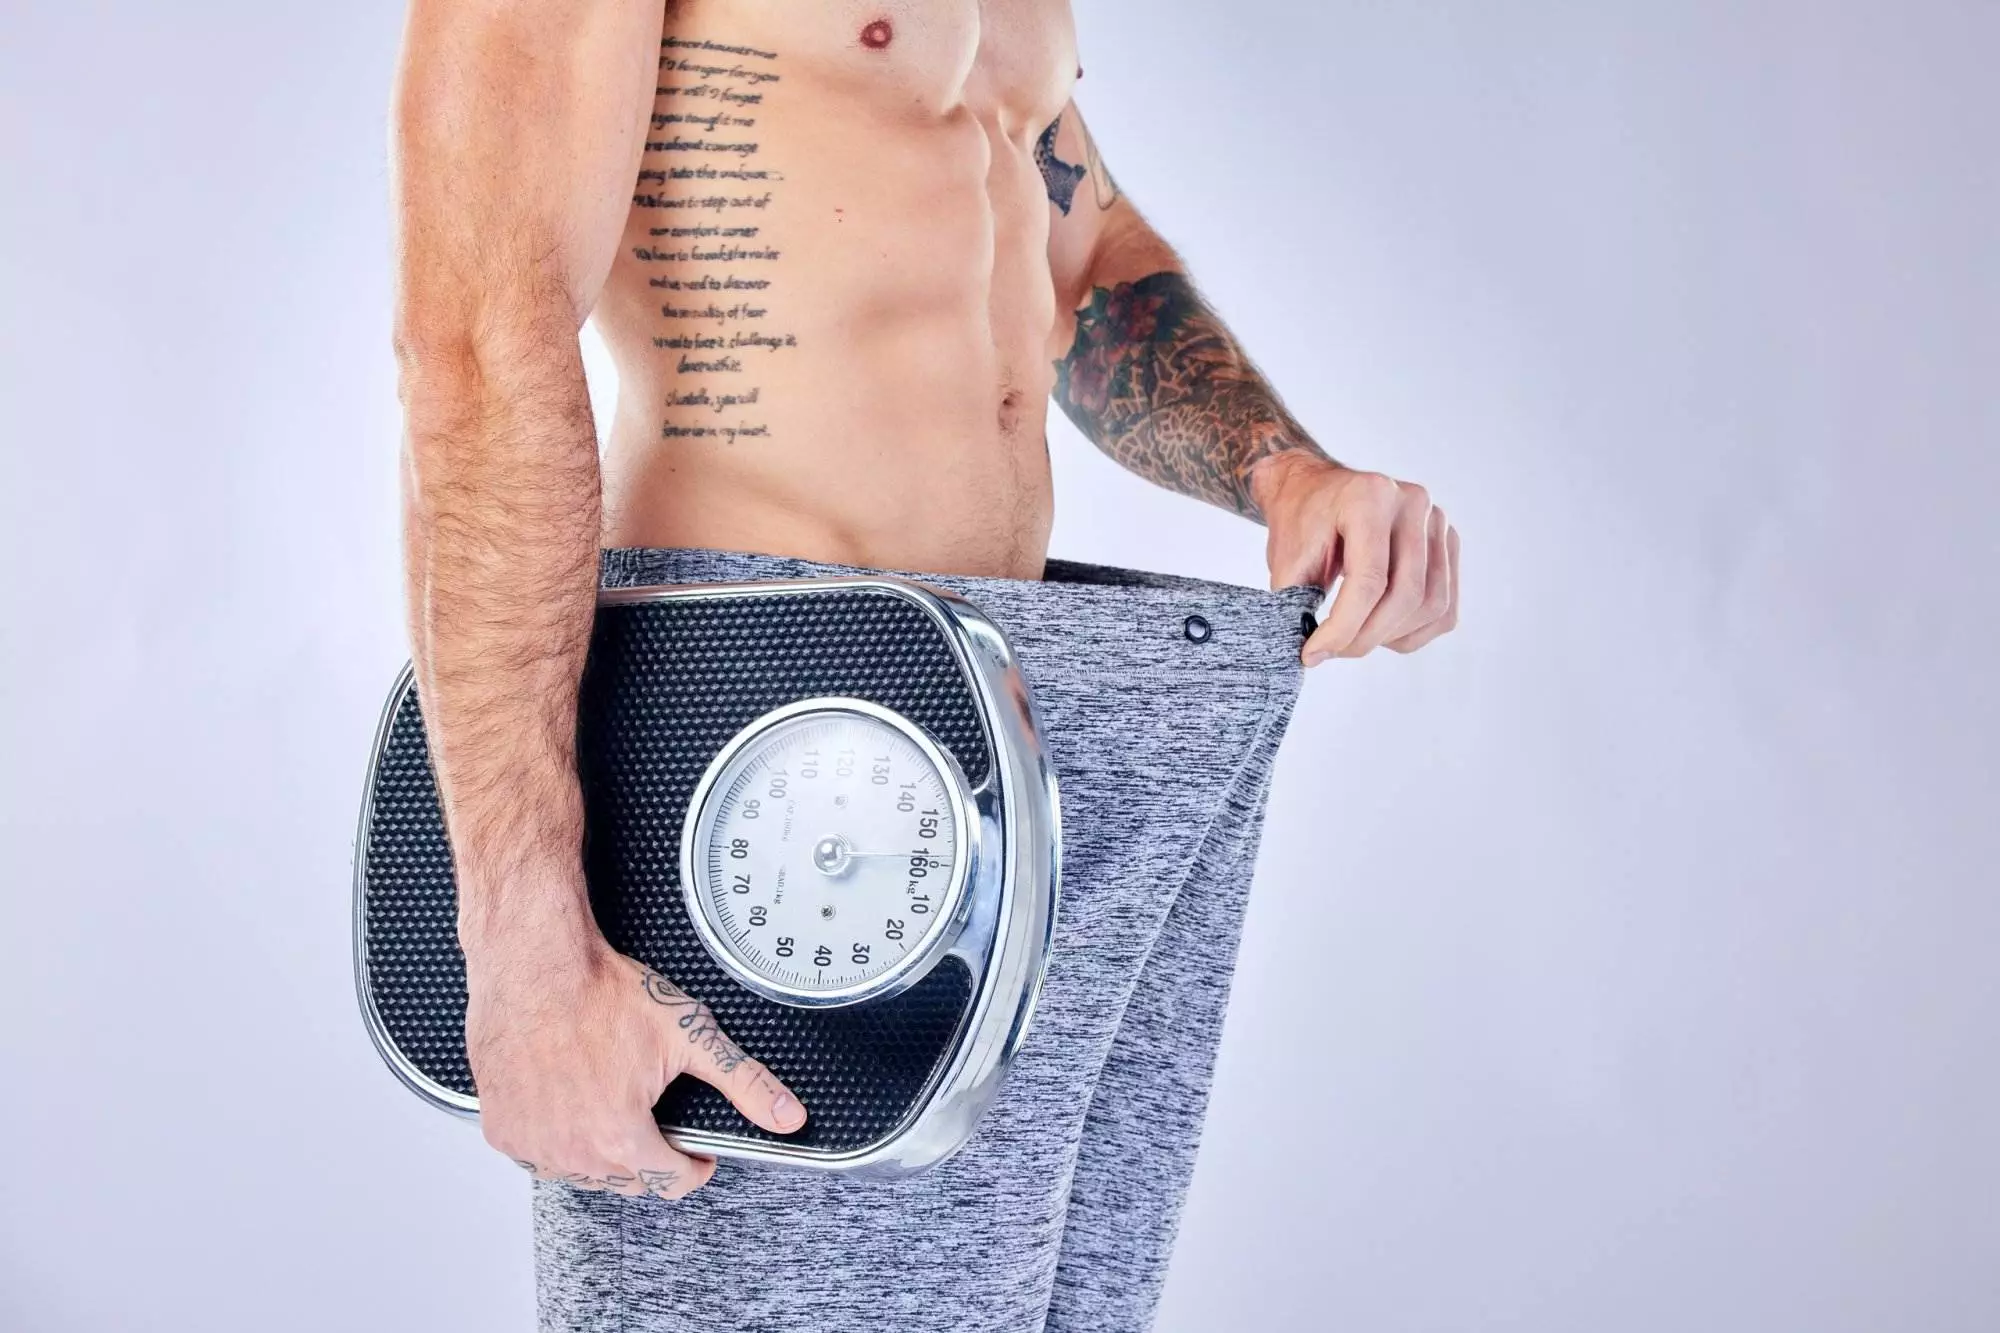 Man holding scale, showing weight loss achievement.